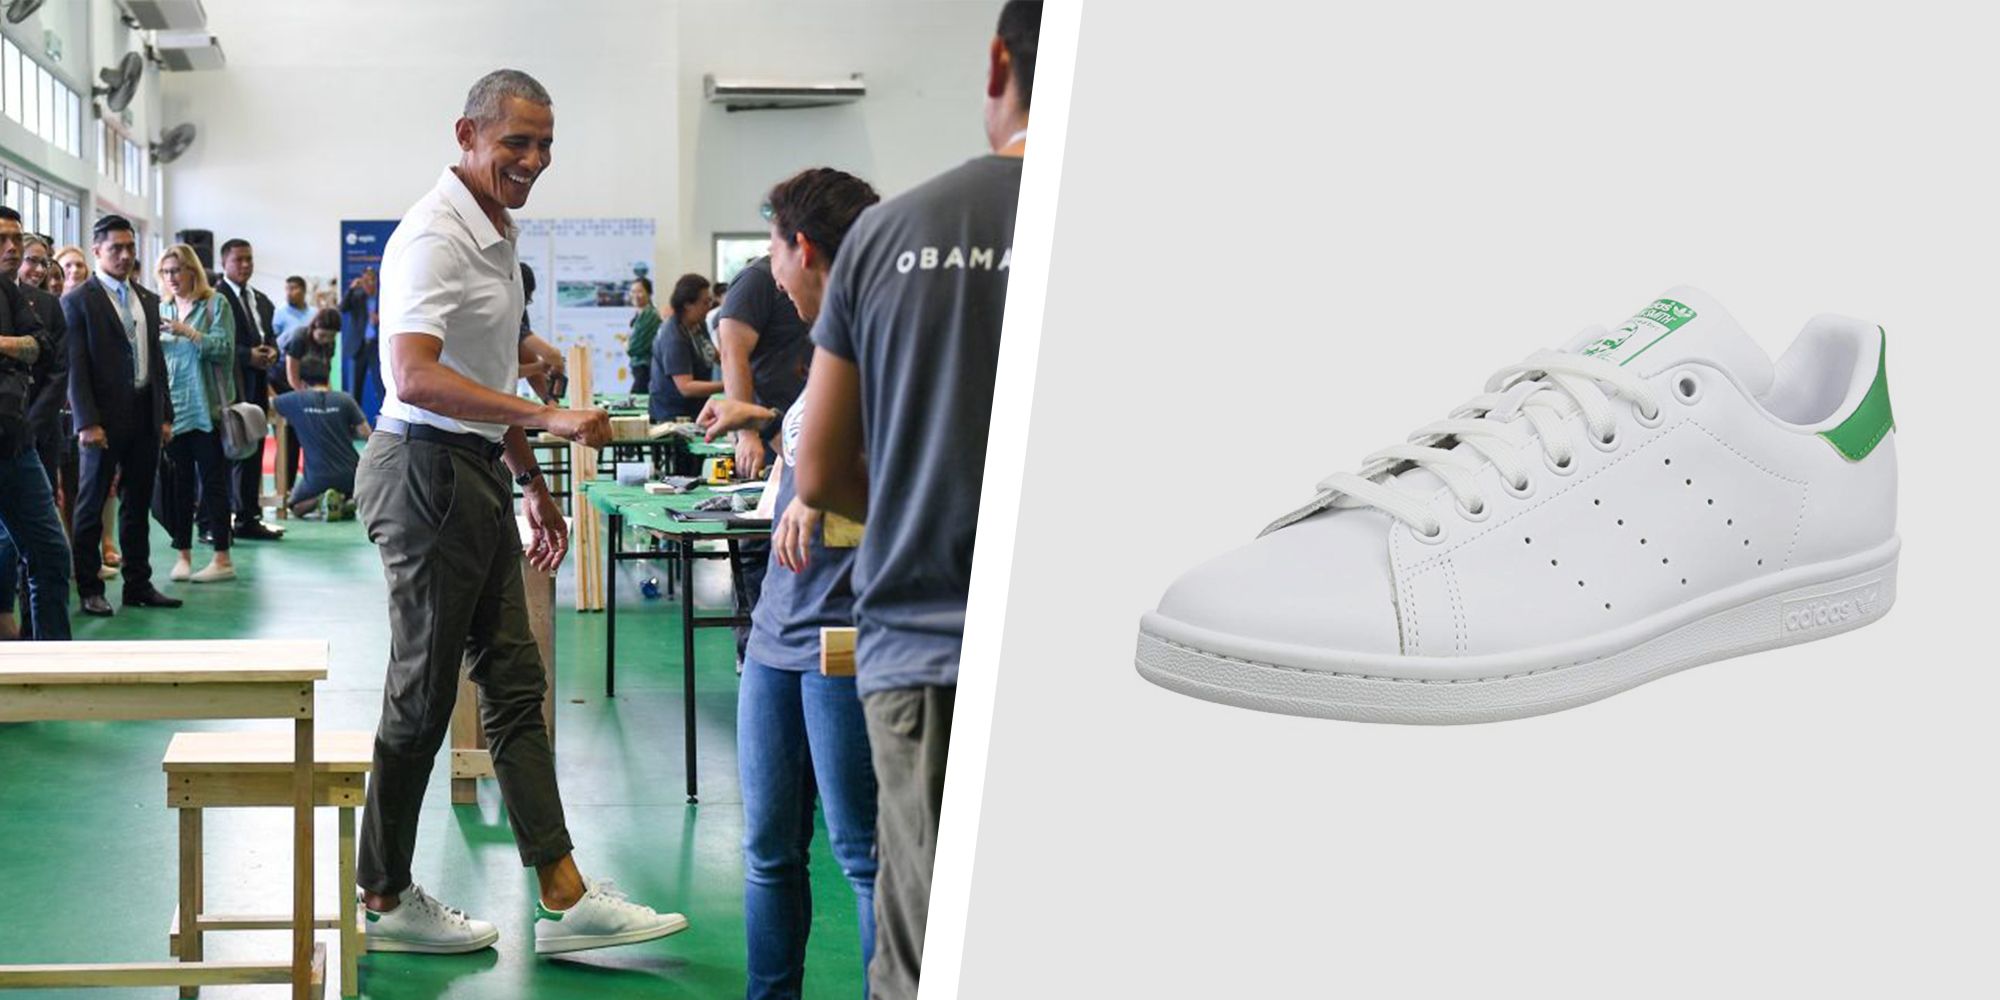 Barack Adidas Stan Smith Sneakers Prove He's a Icon